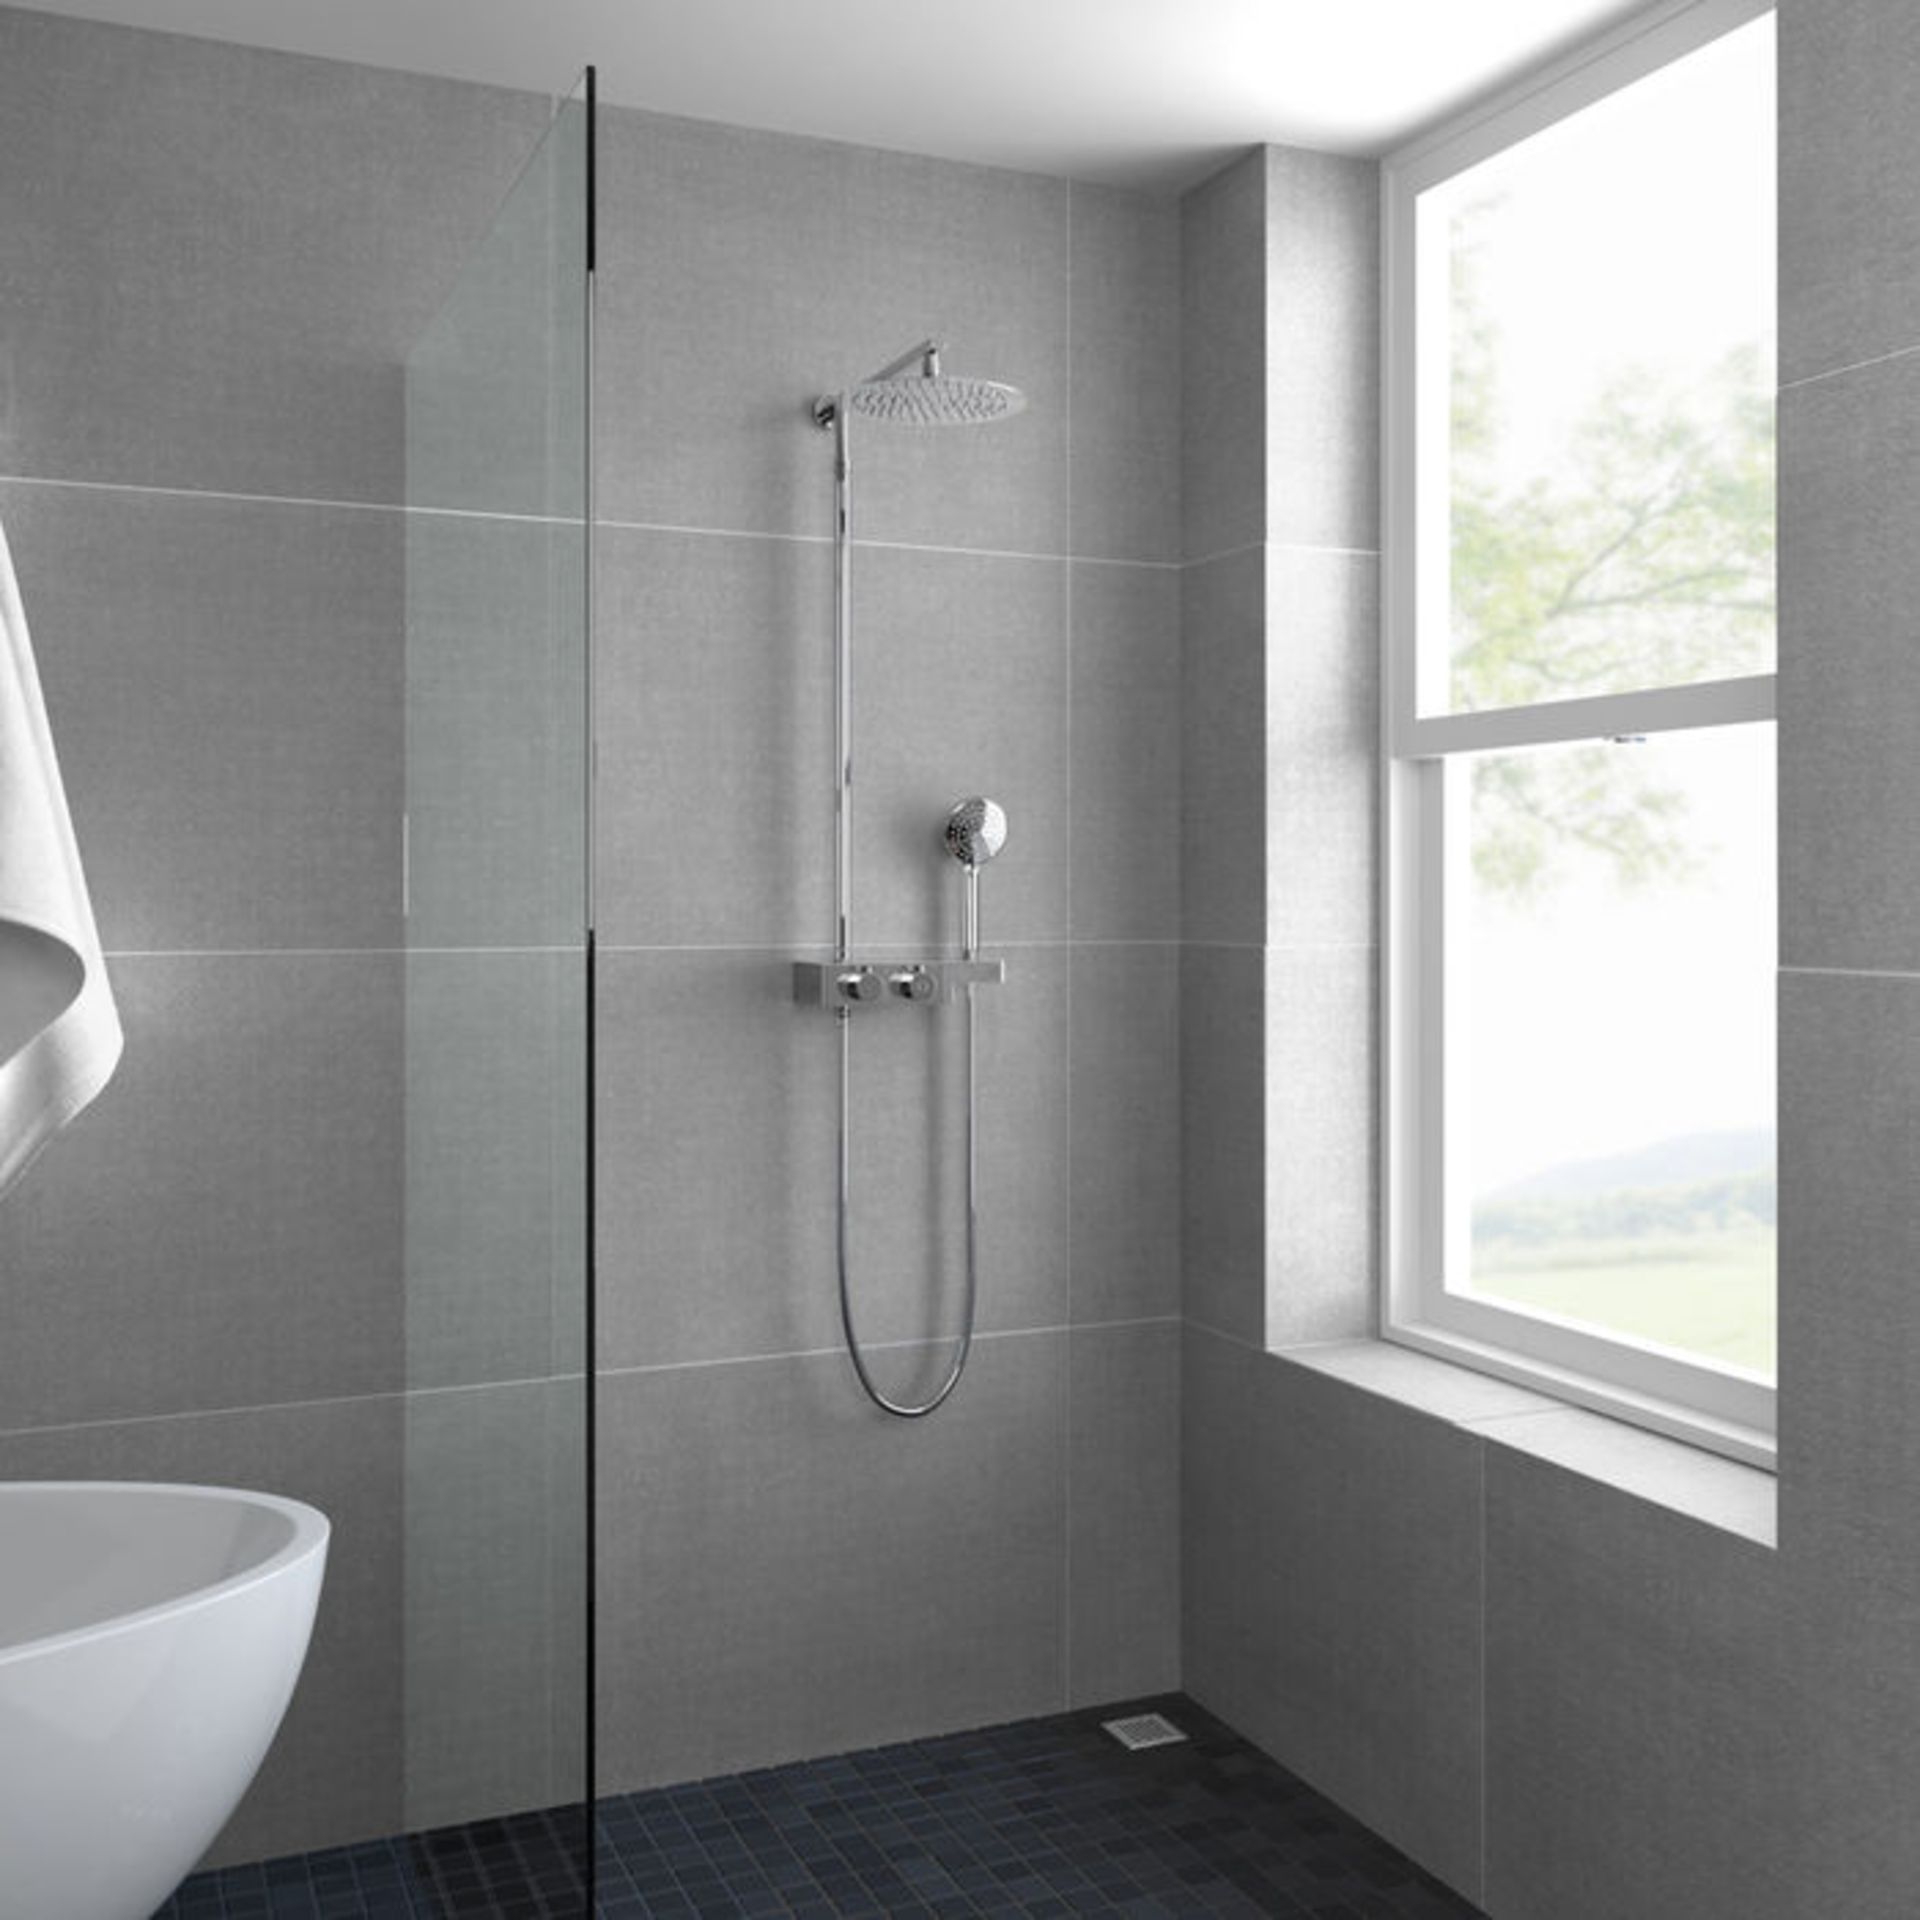 (H35) Round Exposed Thermostatic Mixer Shower Kit & Large Head. Cool to touch shower for - Image 3 of 6